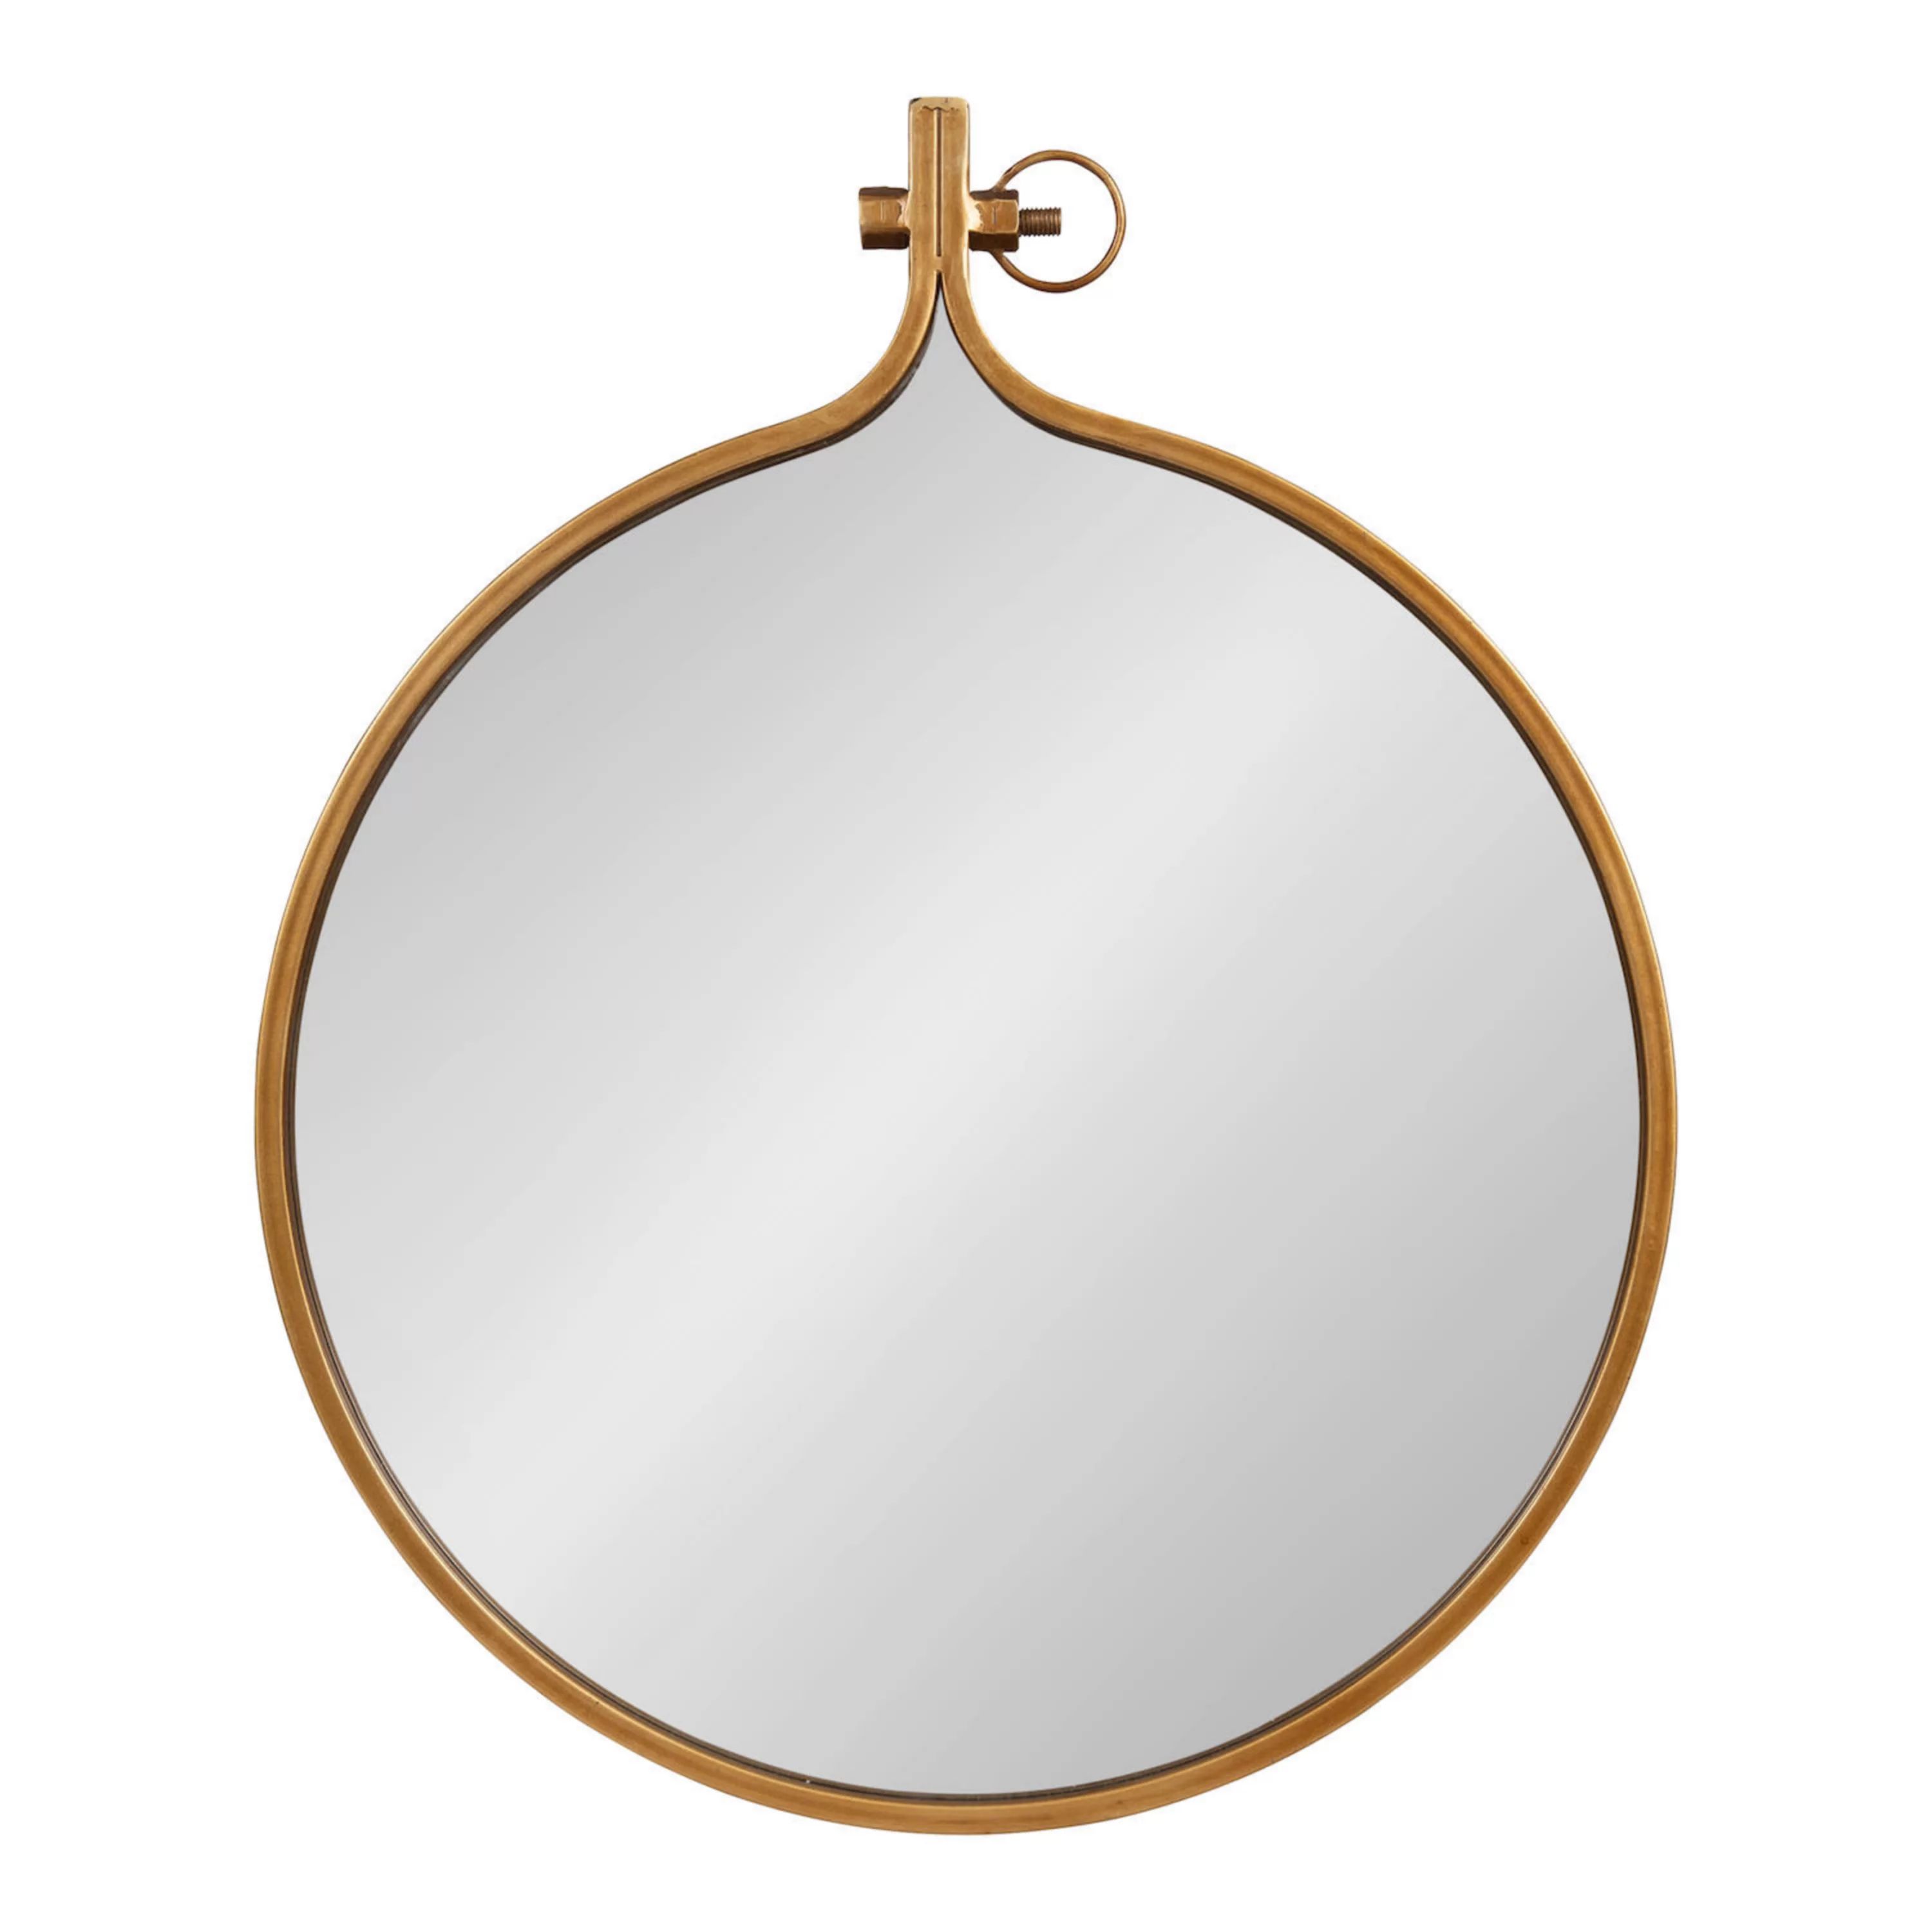 Kate and Laurel Yitro Round Framed Wall Mirror | Kohl's